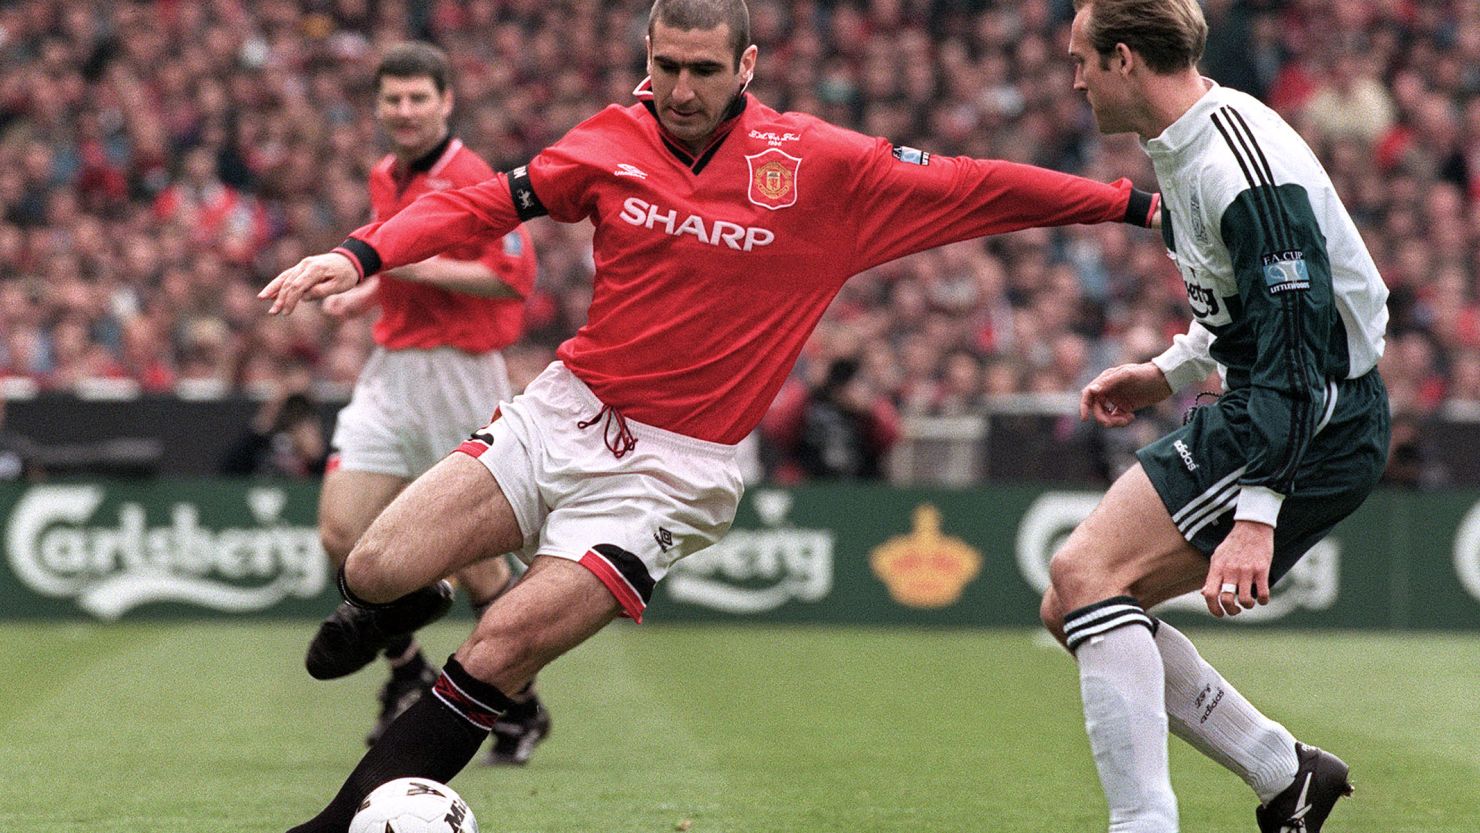 Manchester United's Eric Cantona in a match against Liverpool in 1996.